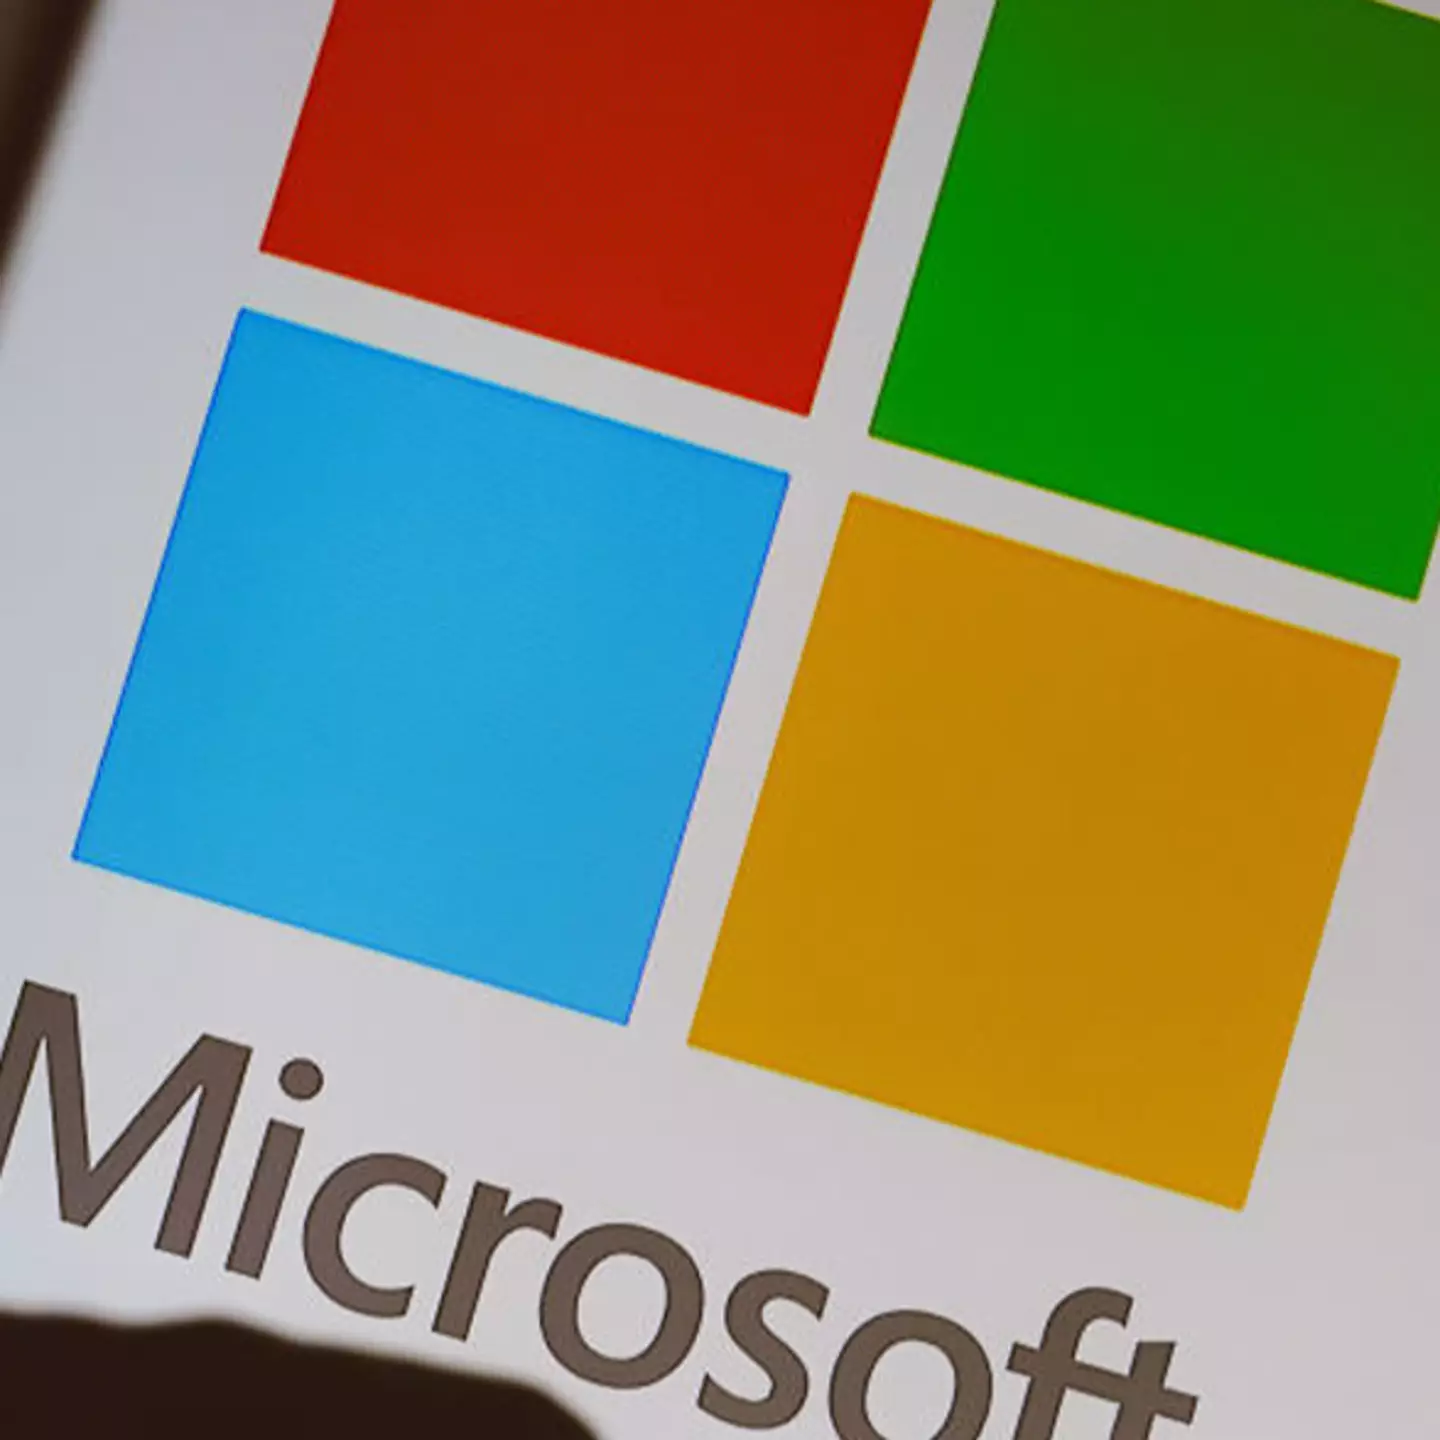 Microsoft surpasses Apple as world’s most valuable company